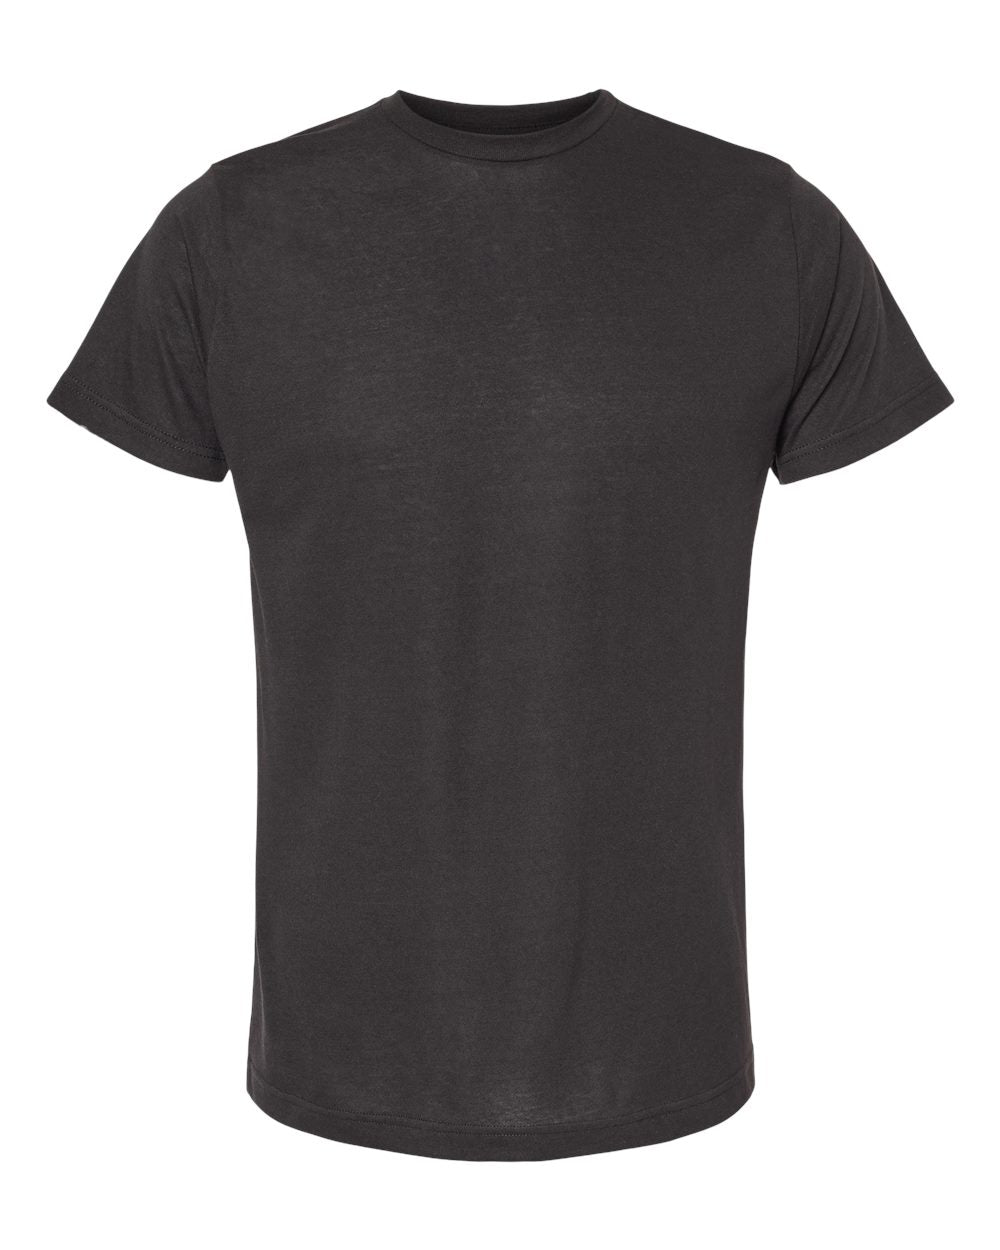 M&O 3541 Deluxe Blend T-shirt